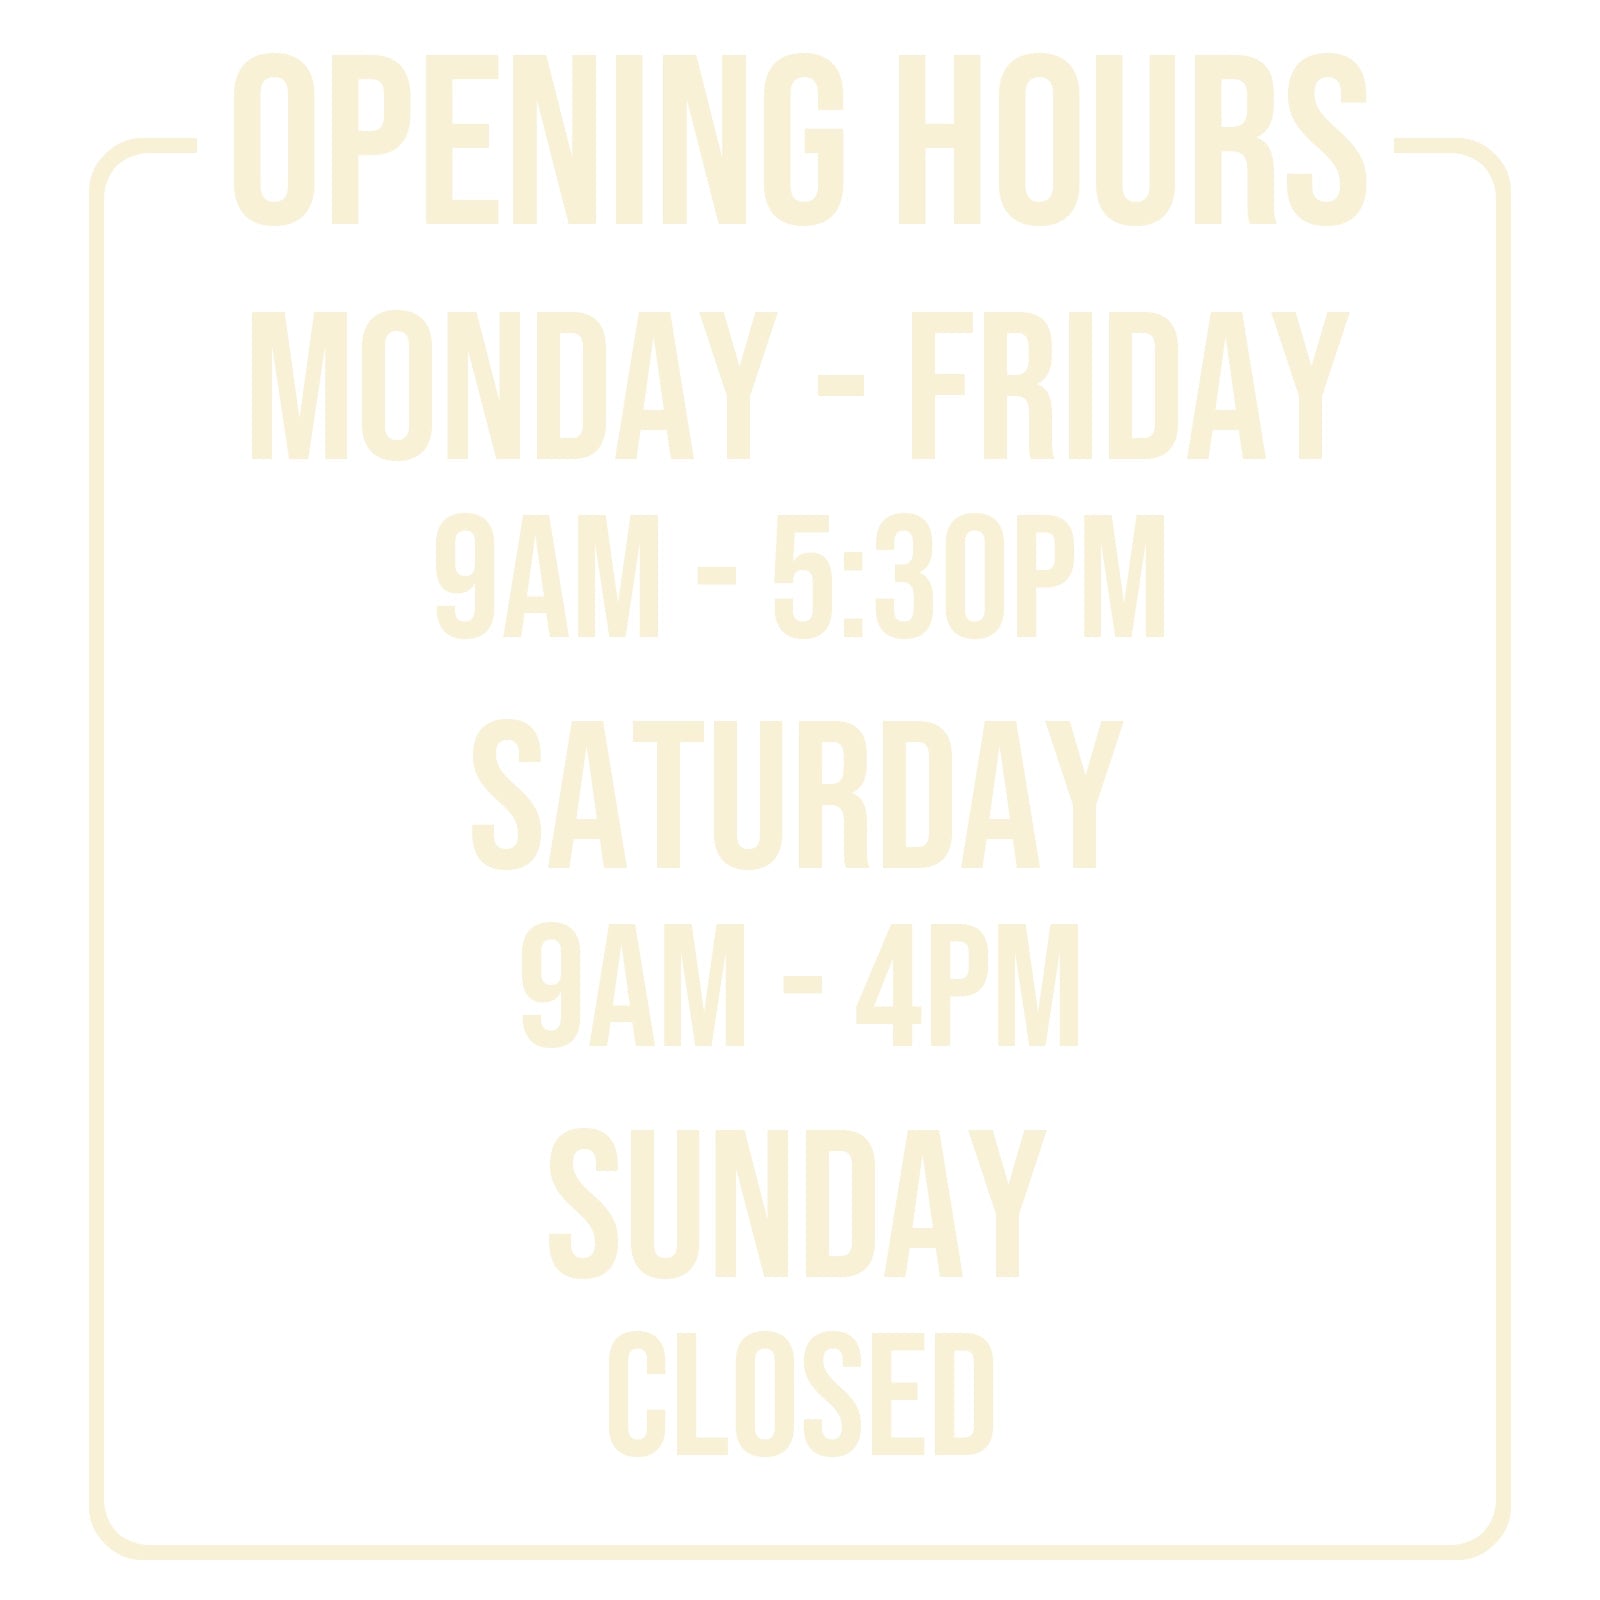 Opening Times for Shop Business Window in Cream